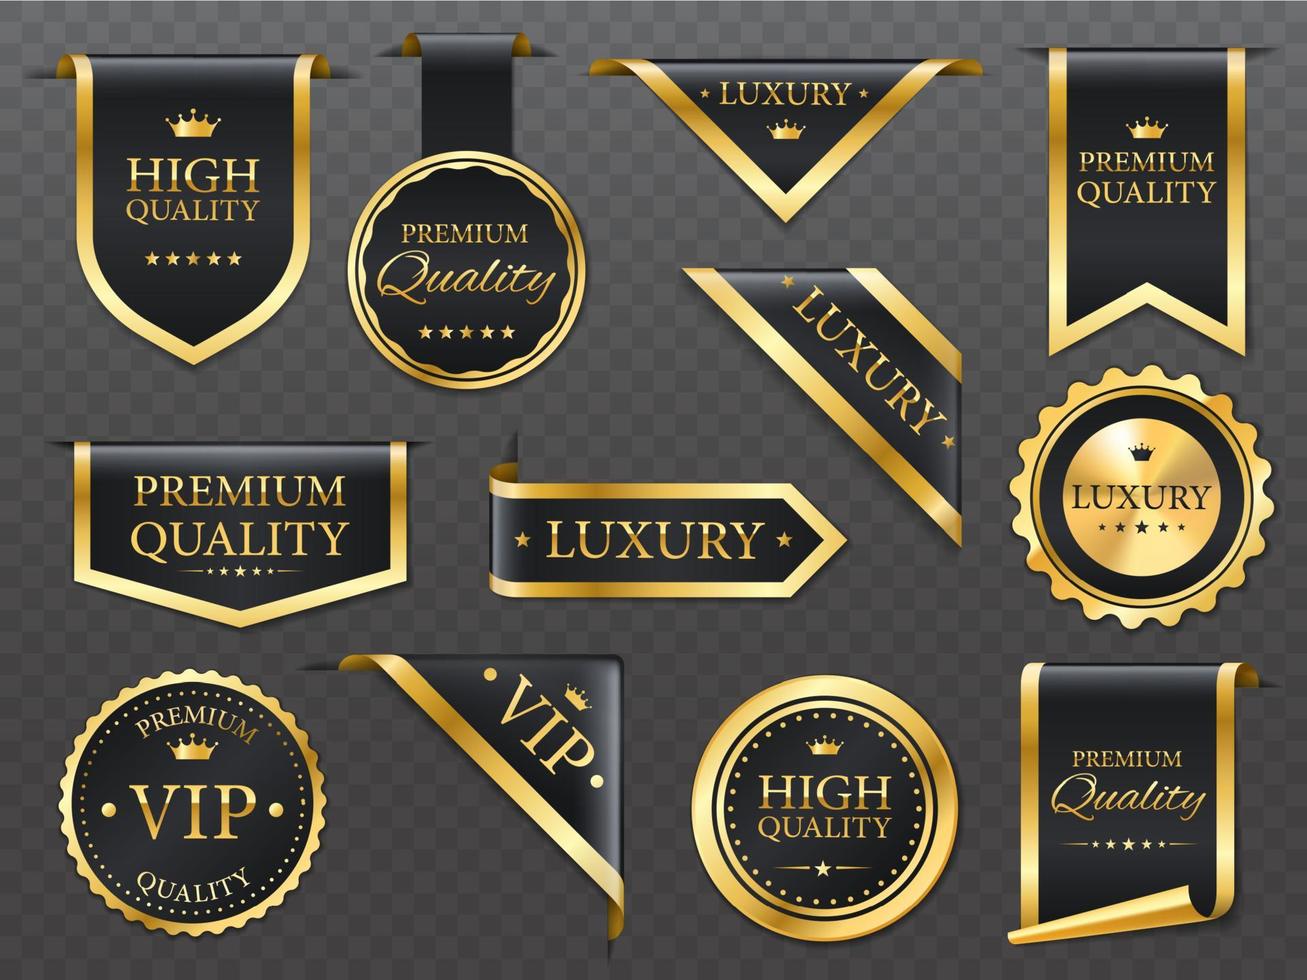 Premium, luxury golden labels, banners and ribbons vector